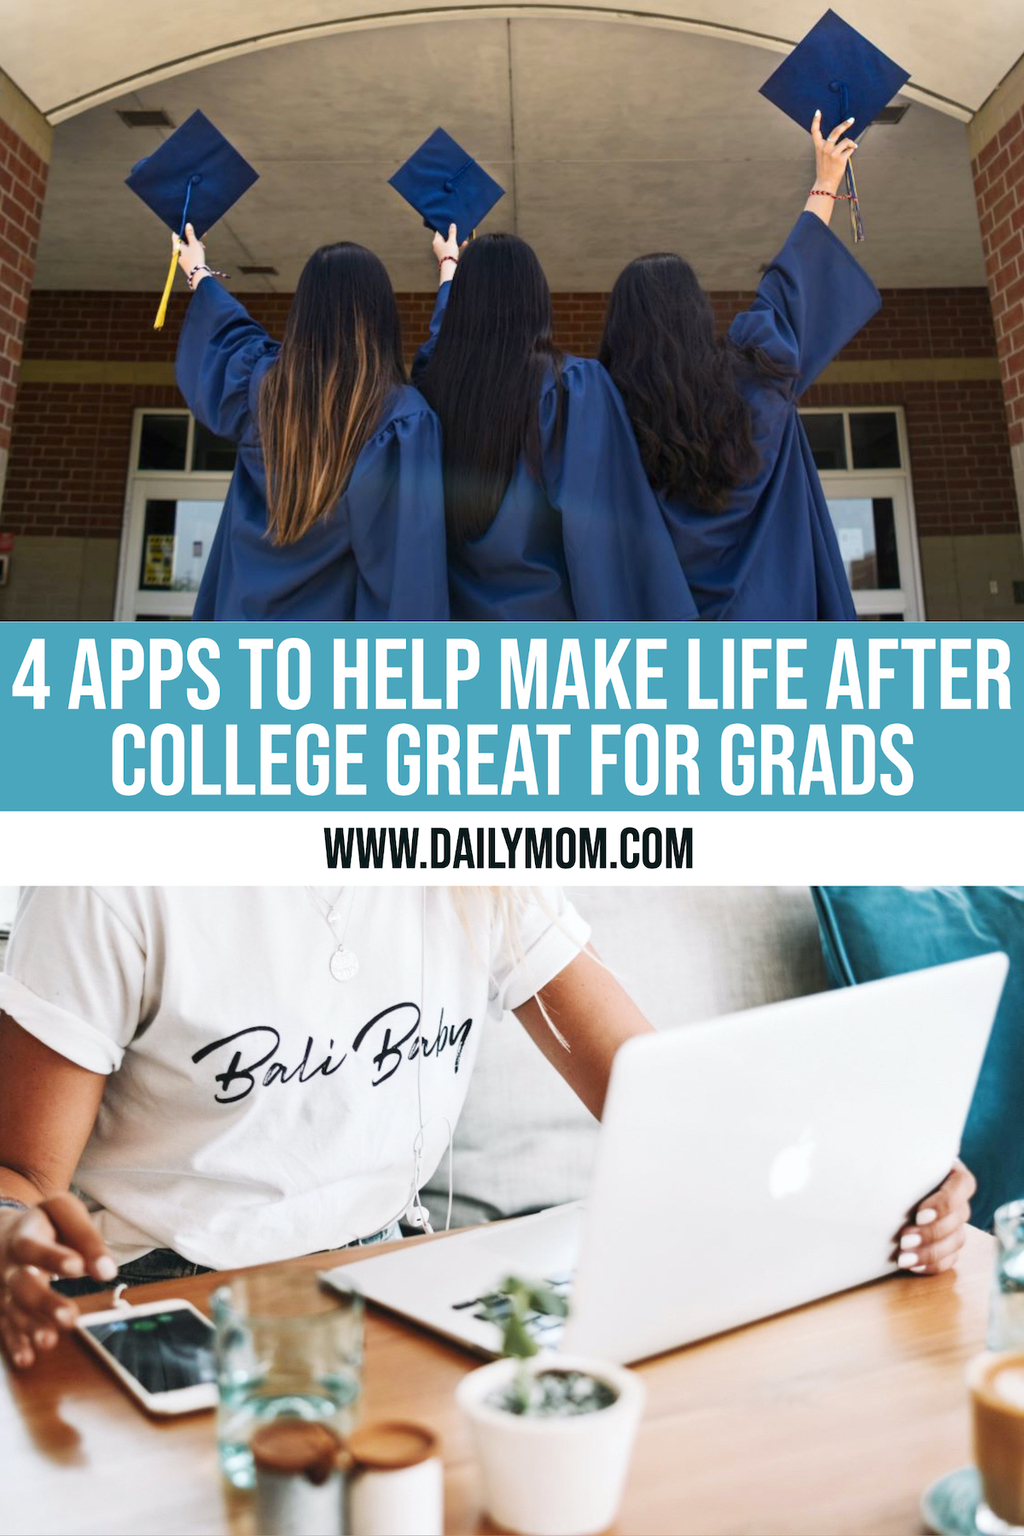 4 Apps To Help Make Life After College Great For Grads